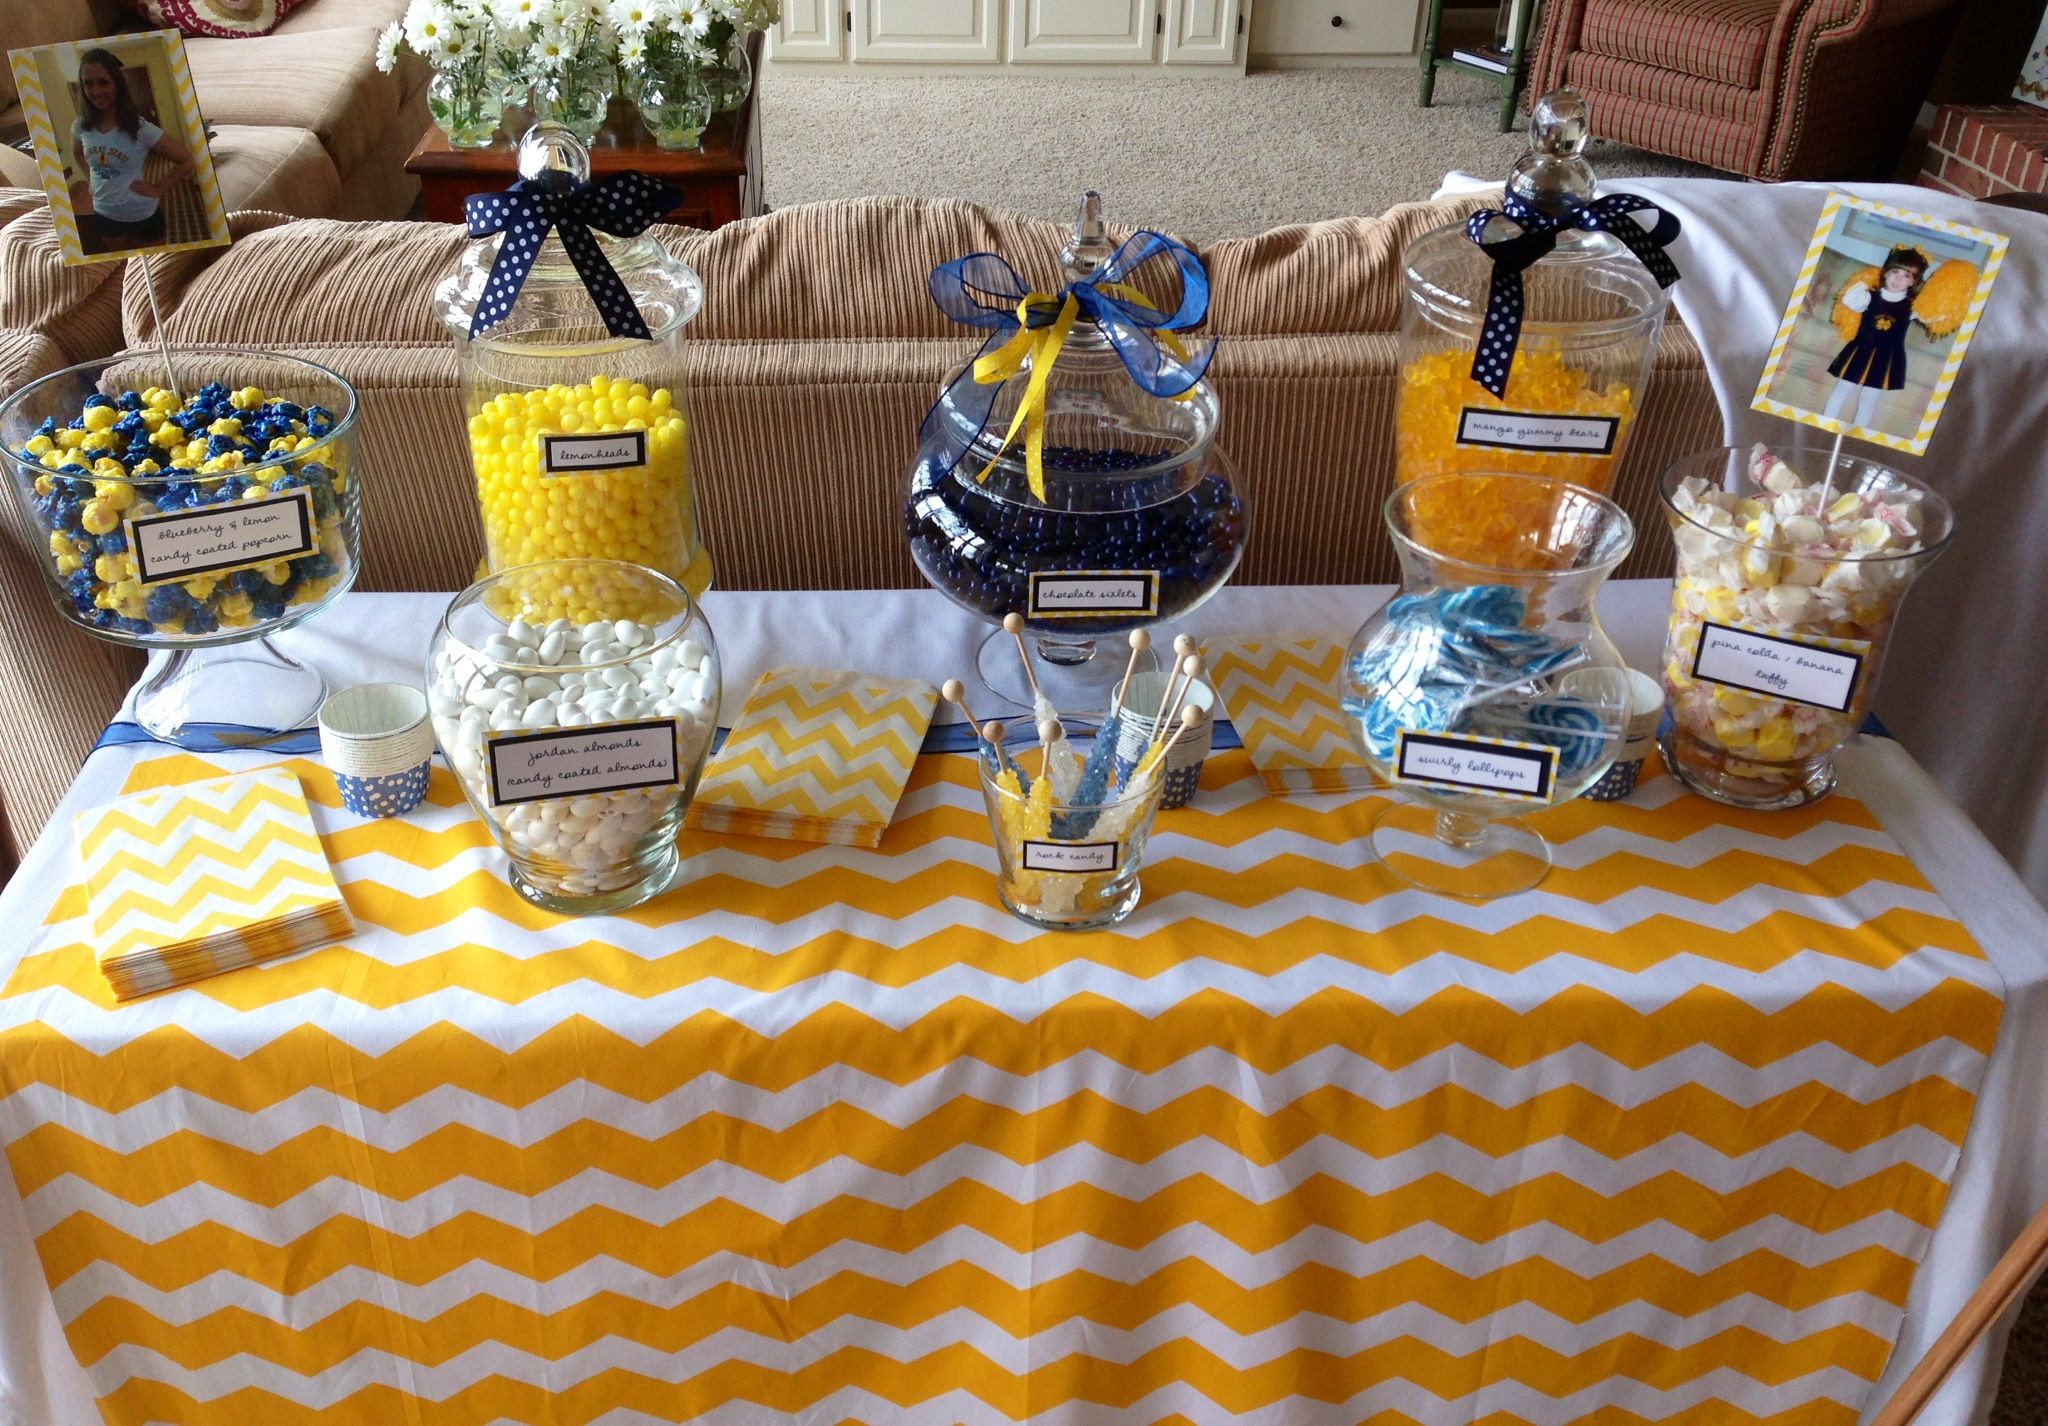 Graduation Party Ideas Blue And Gold
 Pin on My Grey & Yellow Graduation Party